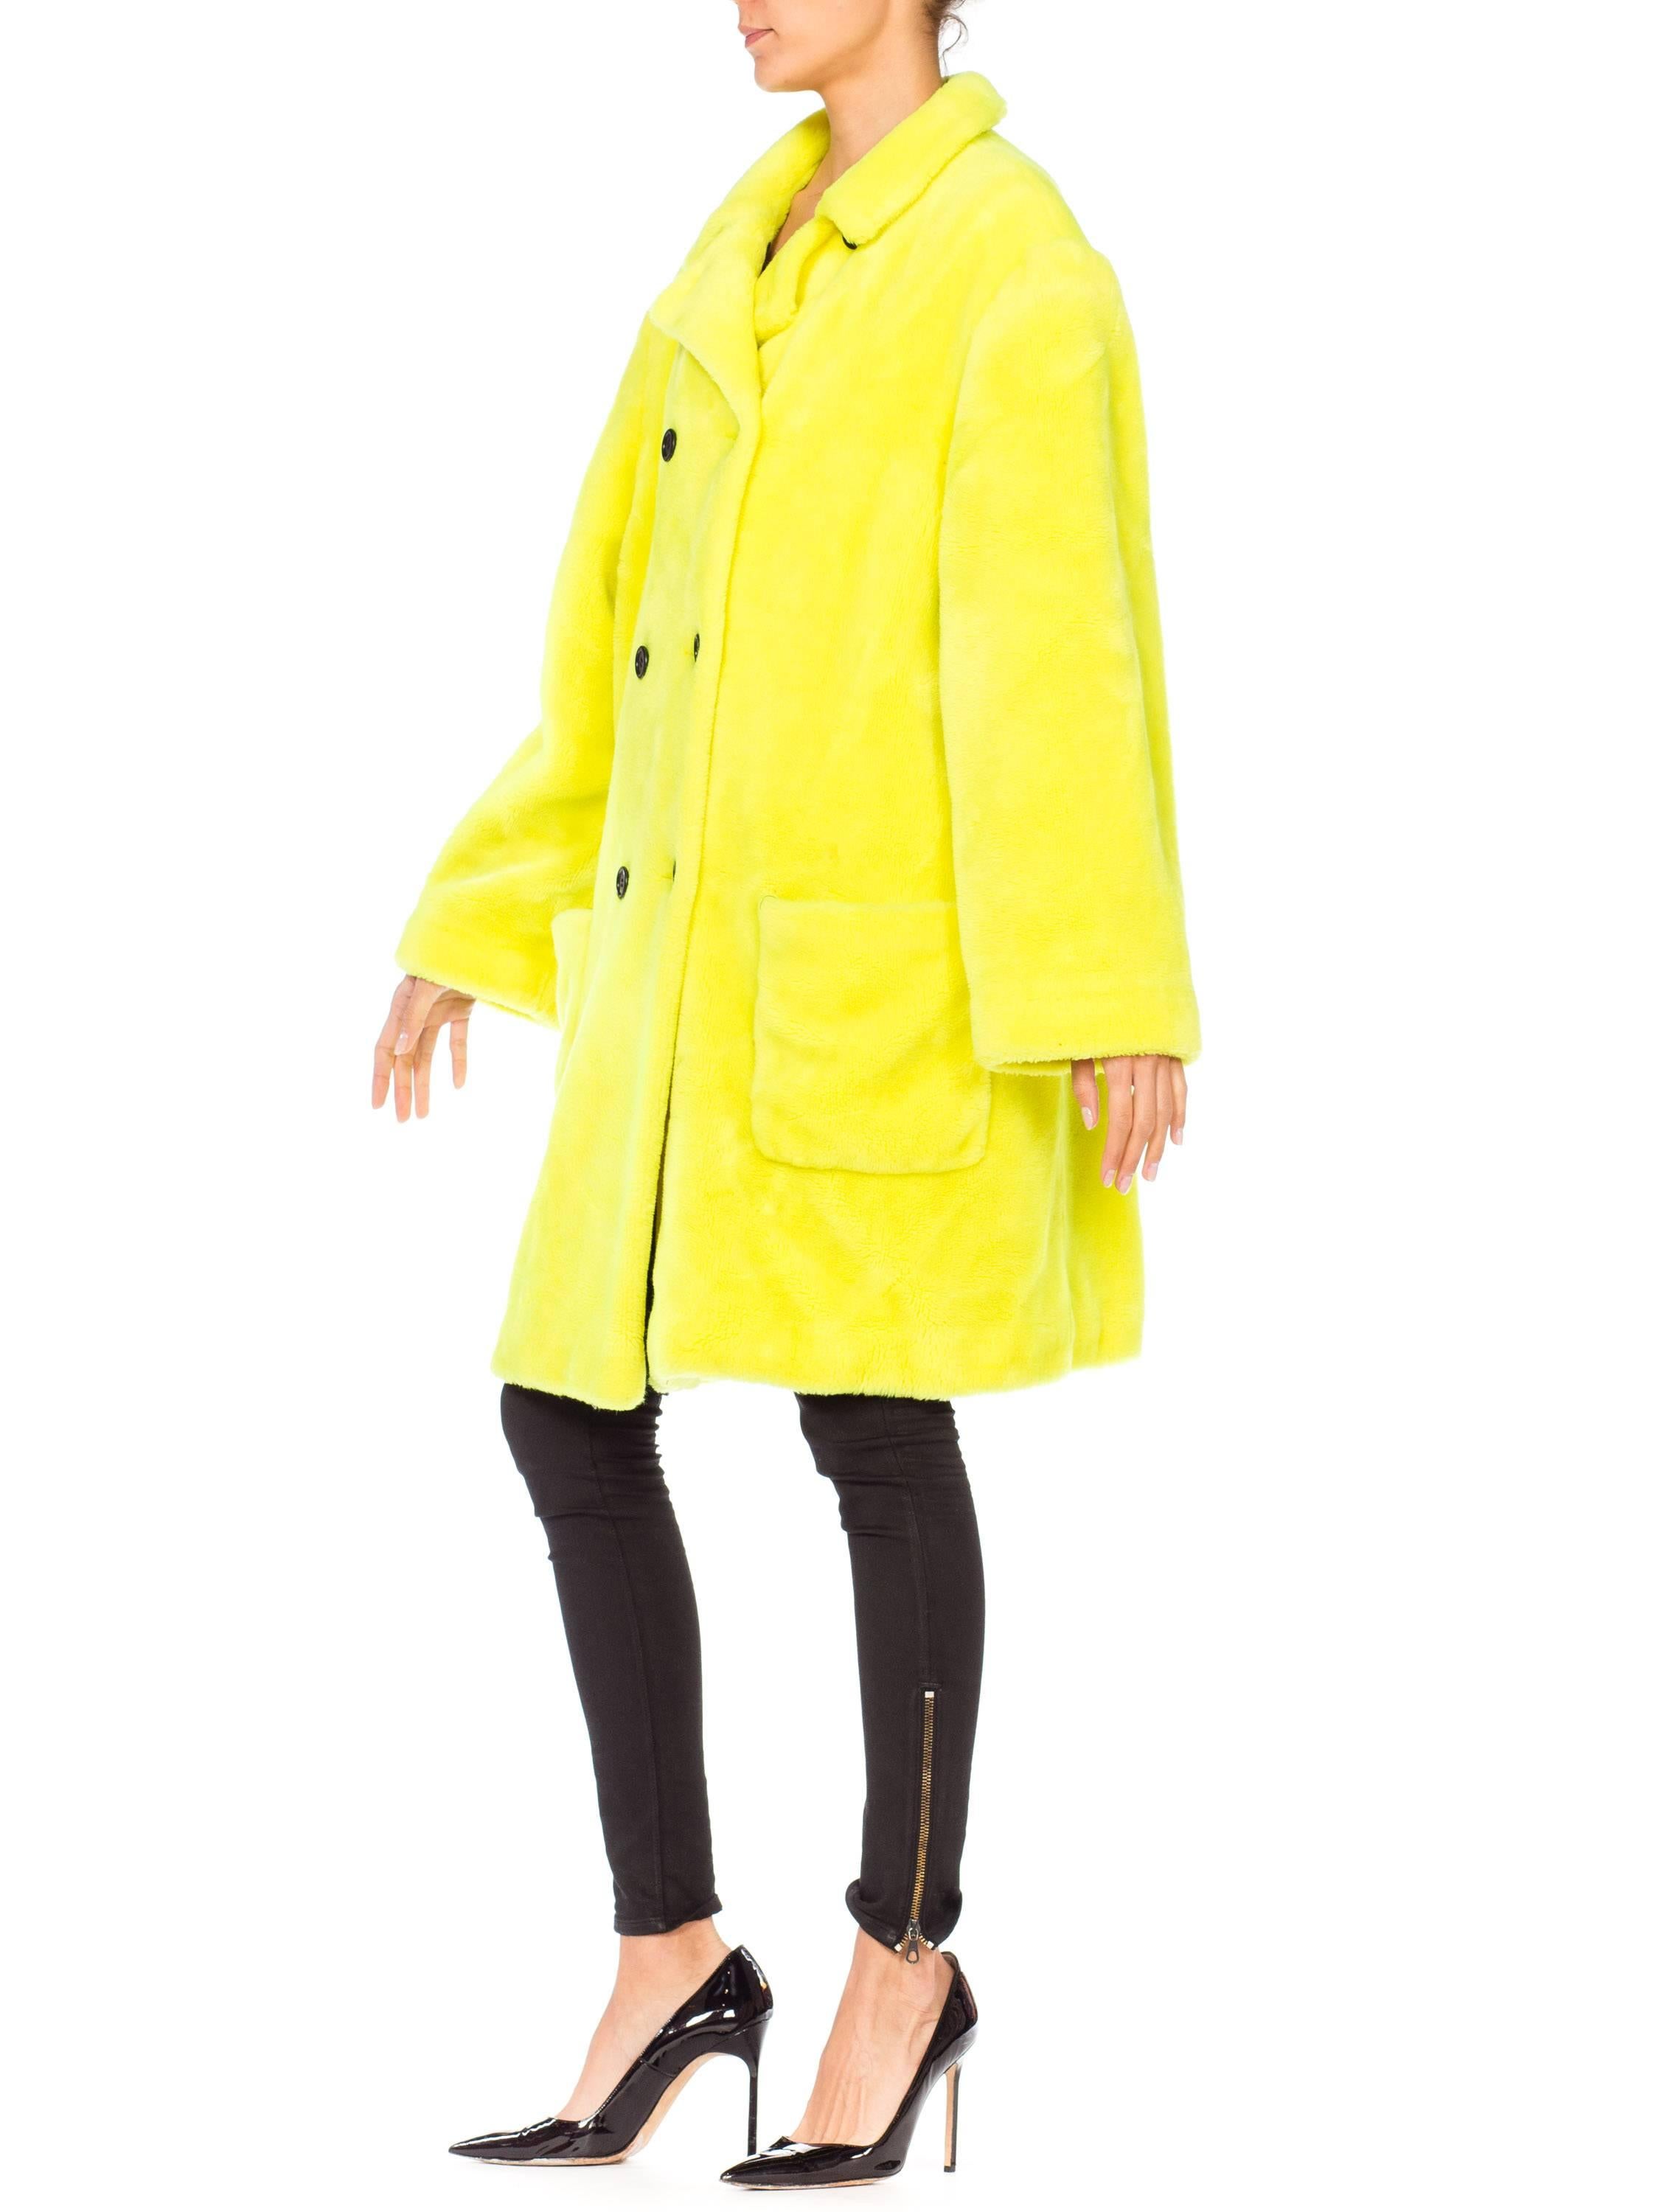 Stephen Sprouse Oversized Highlighter Yellow Faux Fur Coat, 1980s  2